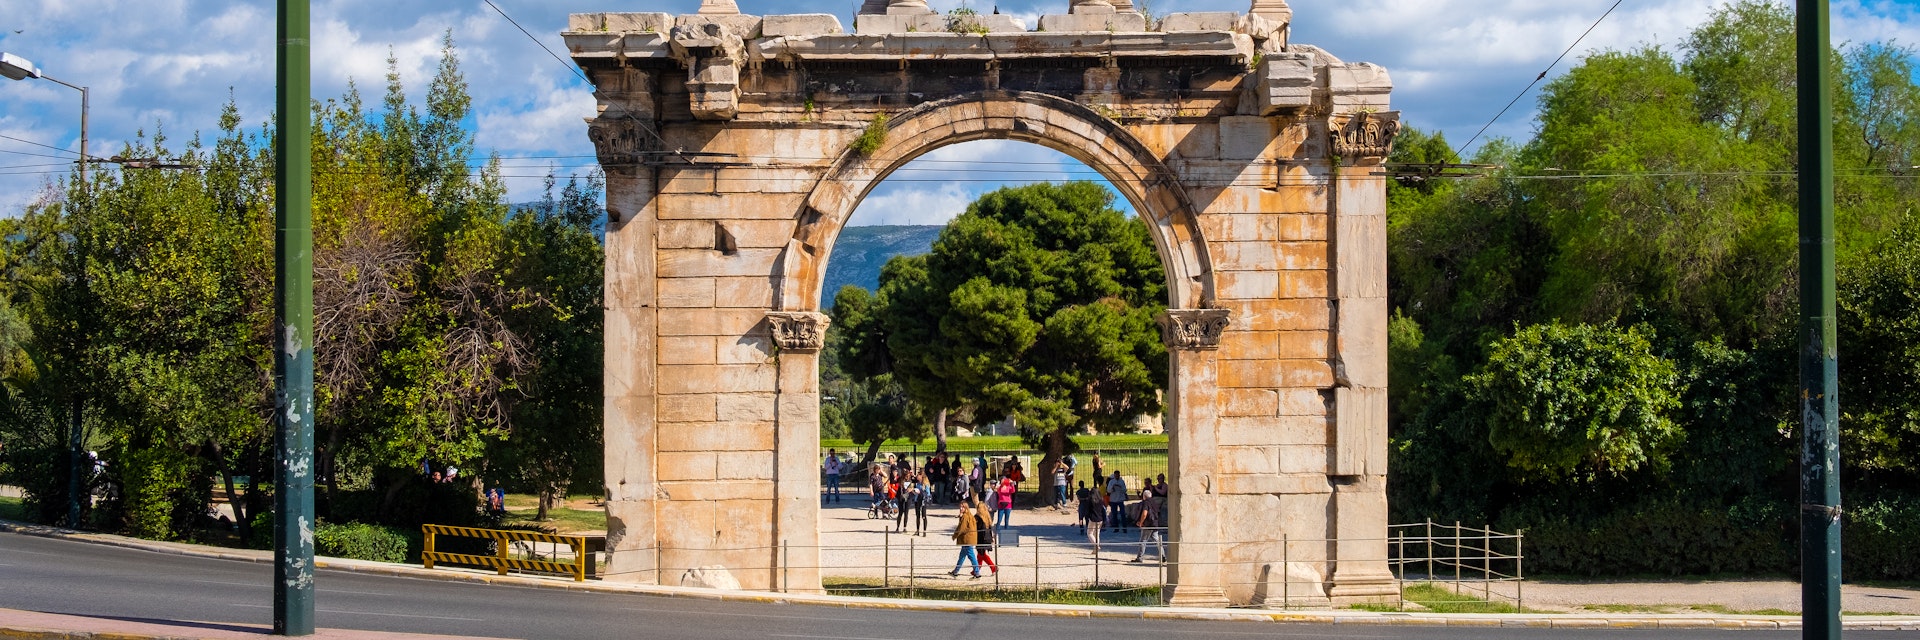 Athens, Attica / Greece - 2018/04/03: Arch of Hadrian known as Hadrian’s Gate as gateway to Temple of Olympian Zeus, Olympieion, in ancient city center old town borough; Shutterstock ID 1730853691; your: Barbara Di Castro; gl: 65050; netsuite: digital; full: poi
1730853691